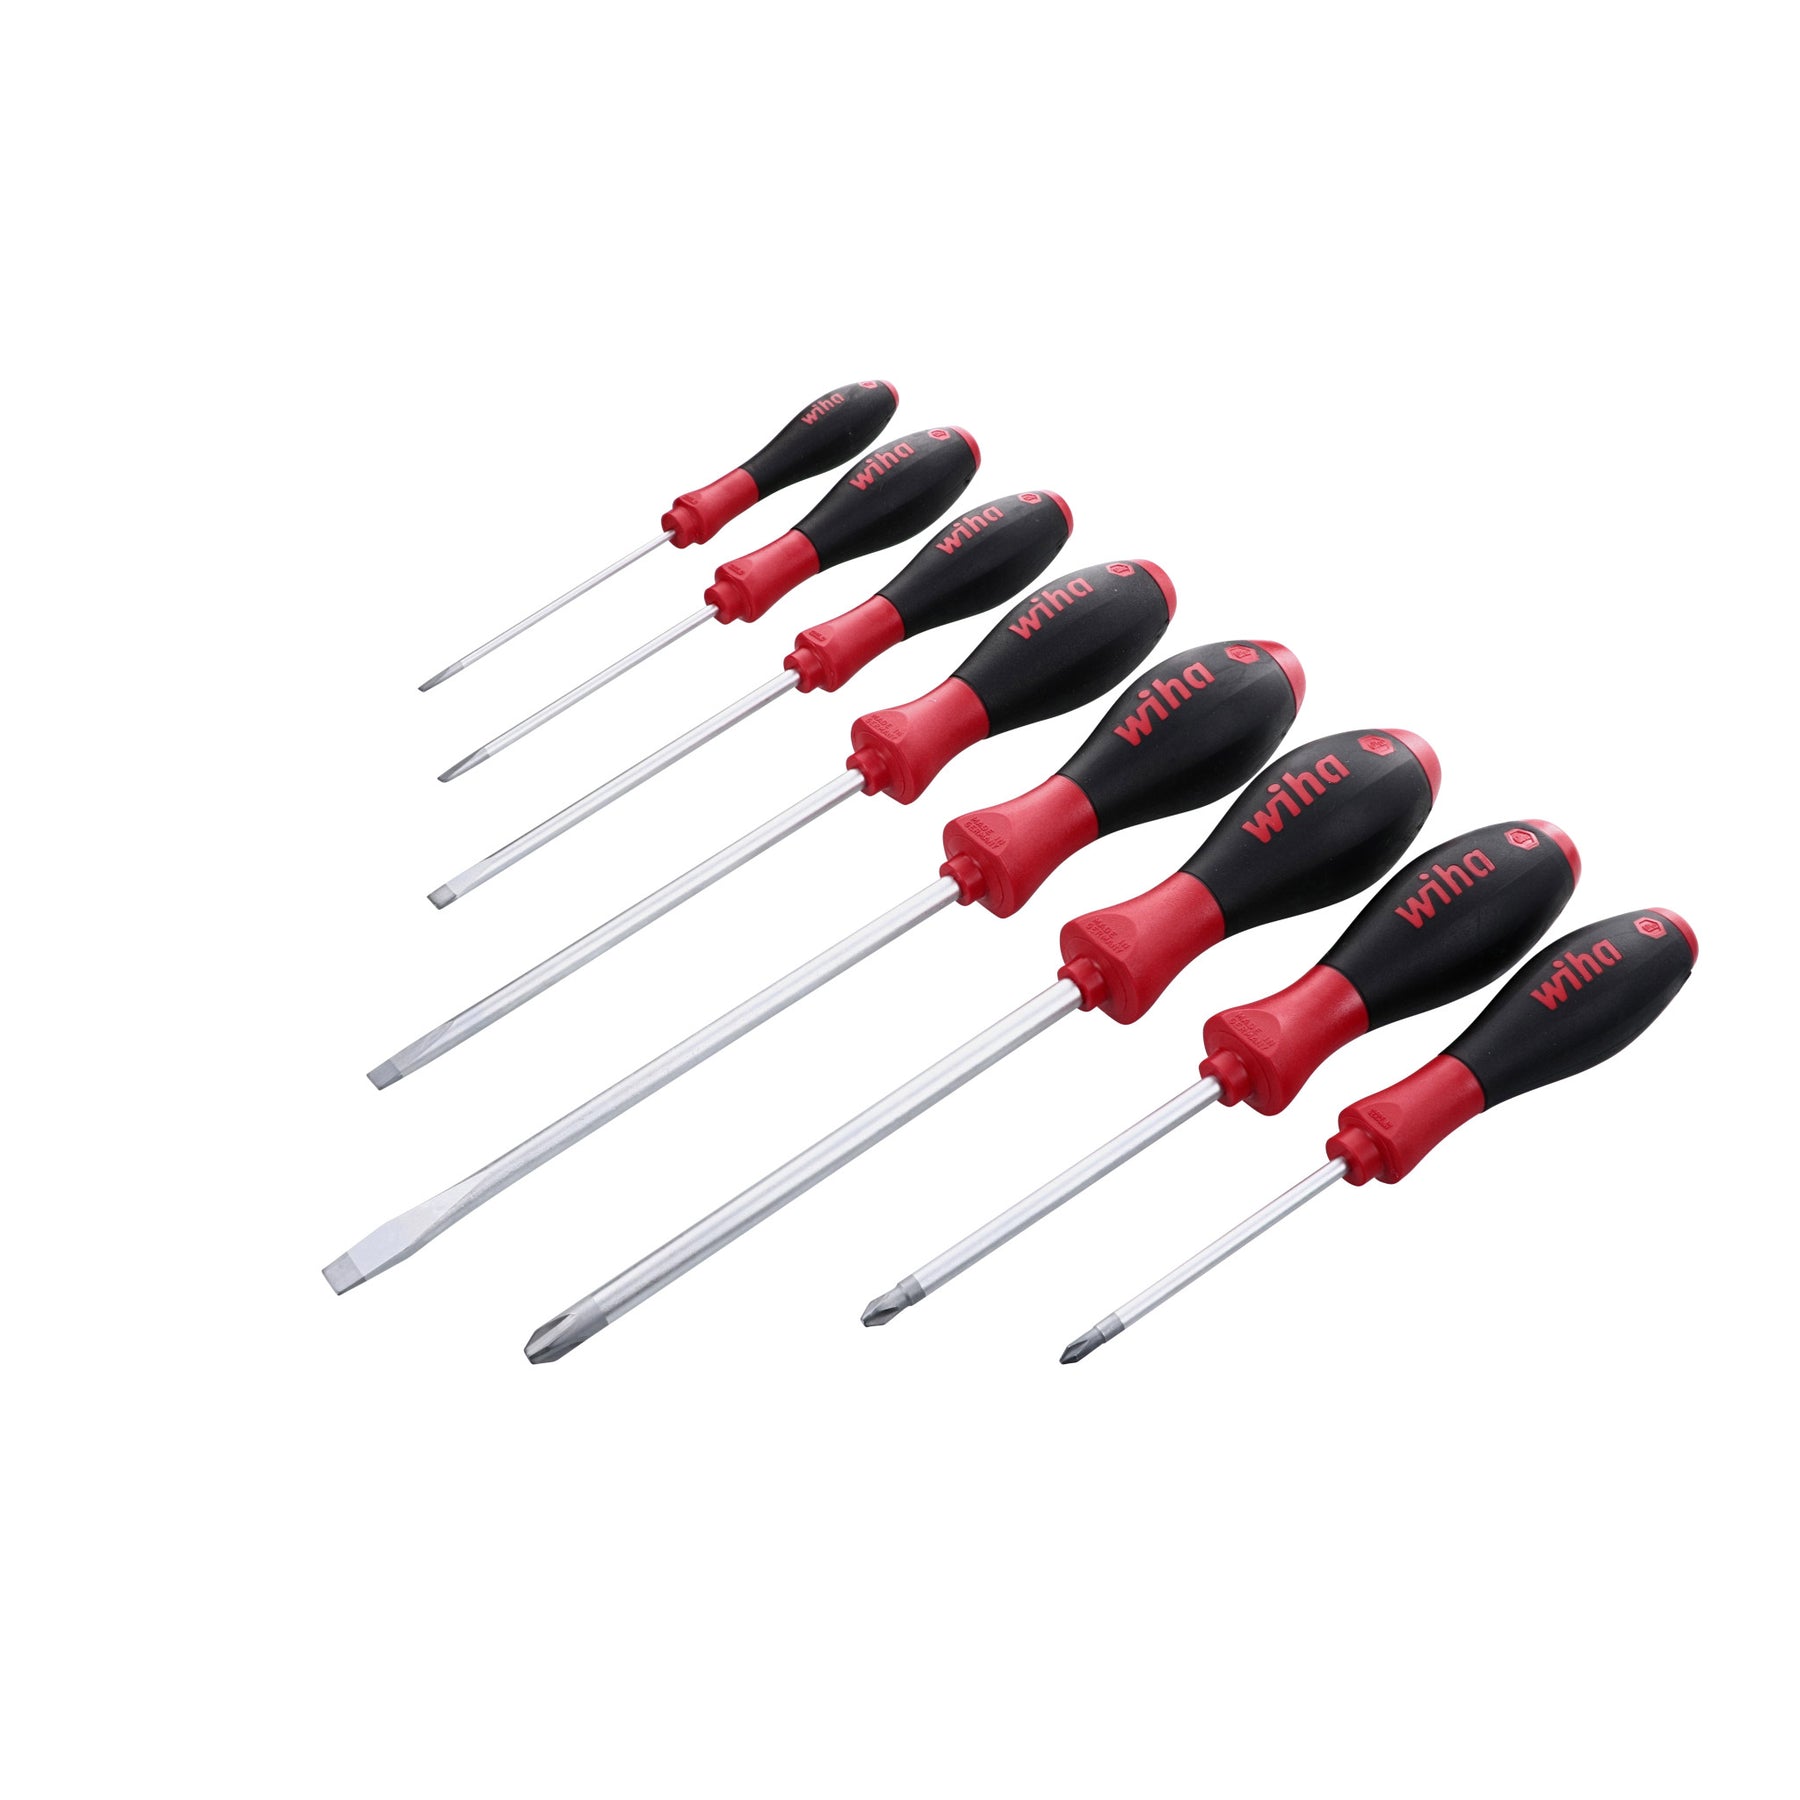 Wiha 30298 8 Piece SoftFinish Slotted and Phillips Screwdriver Set